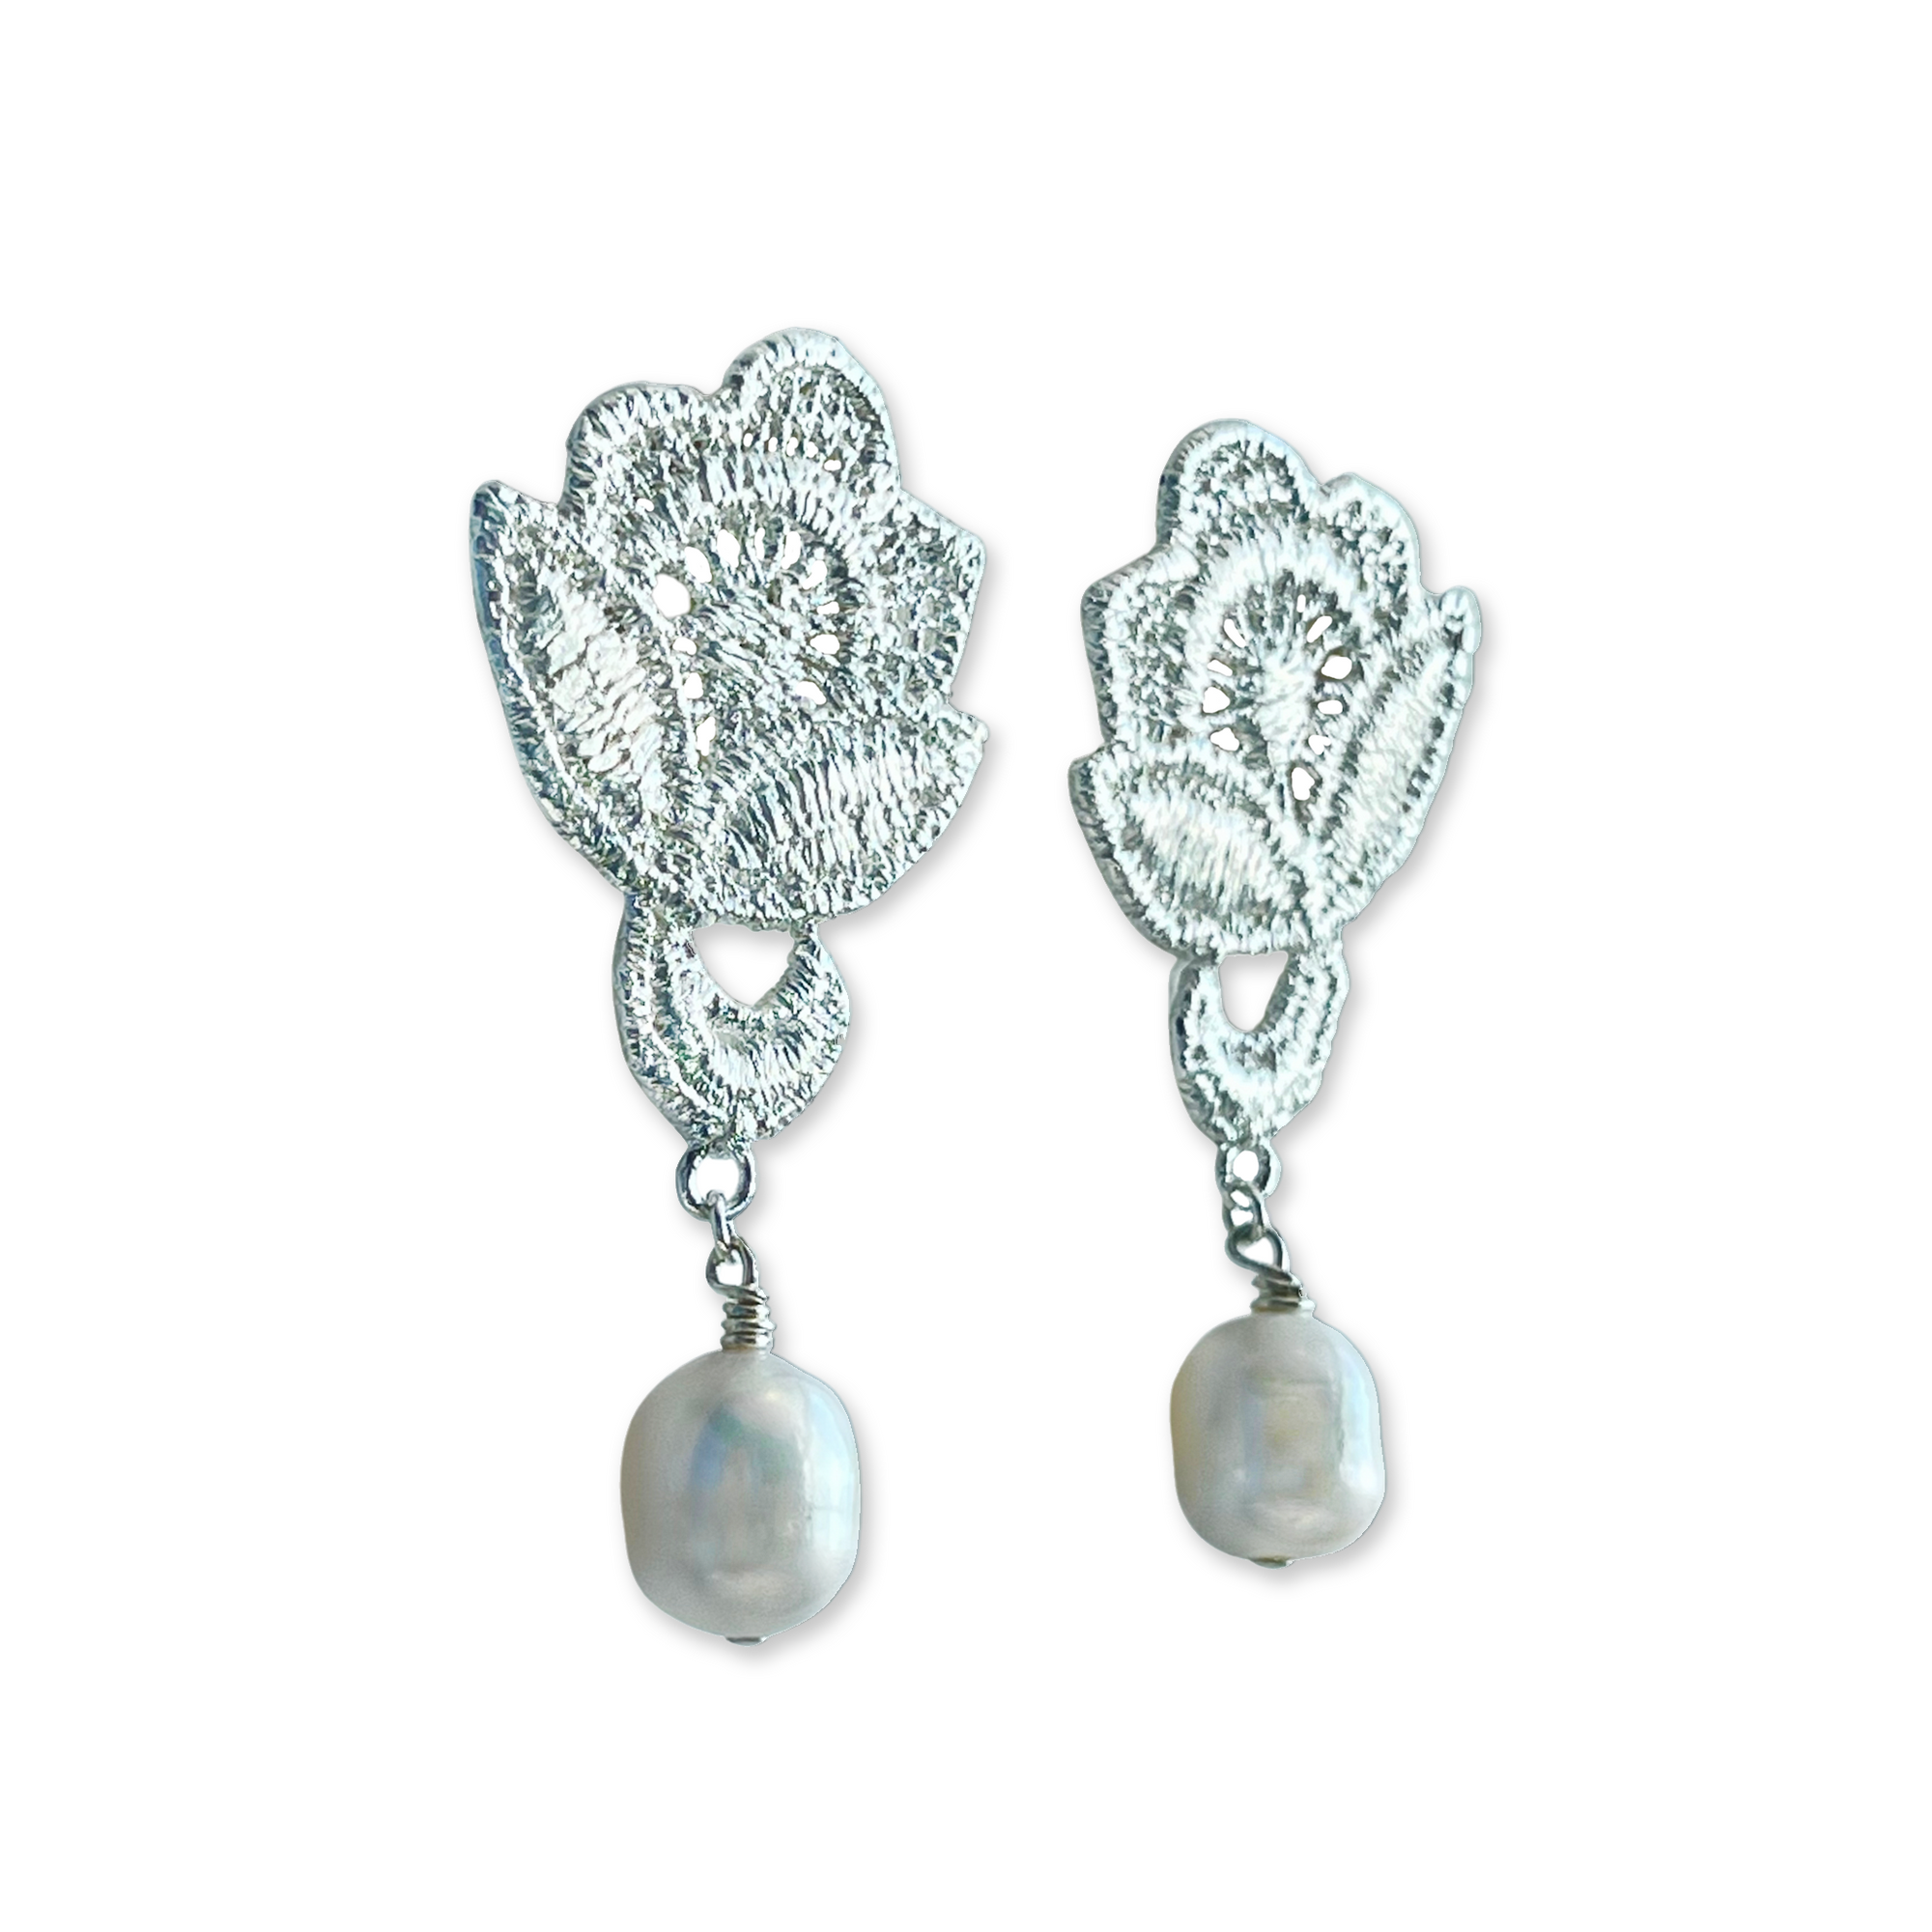 Baroque pearl earrings with lace rose in sterling silver.